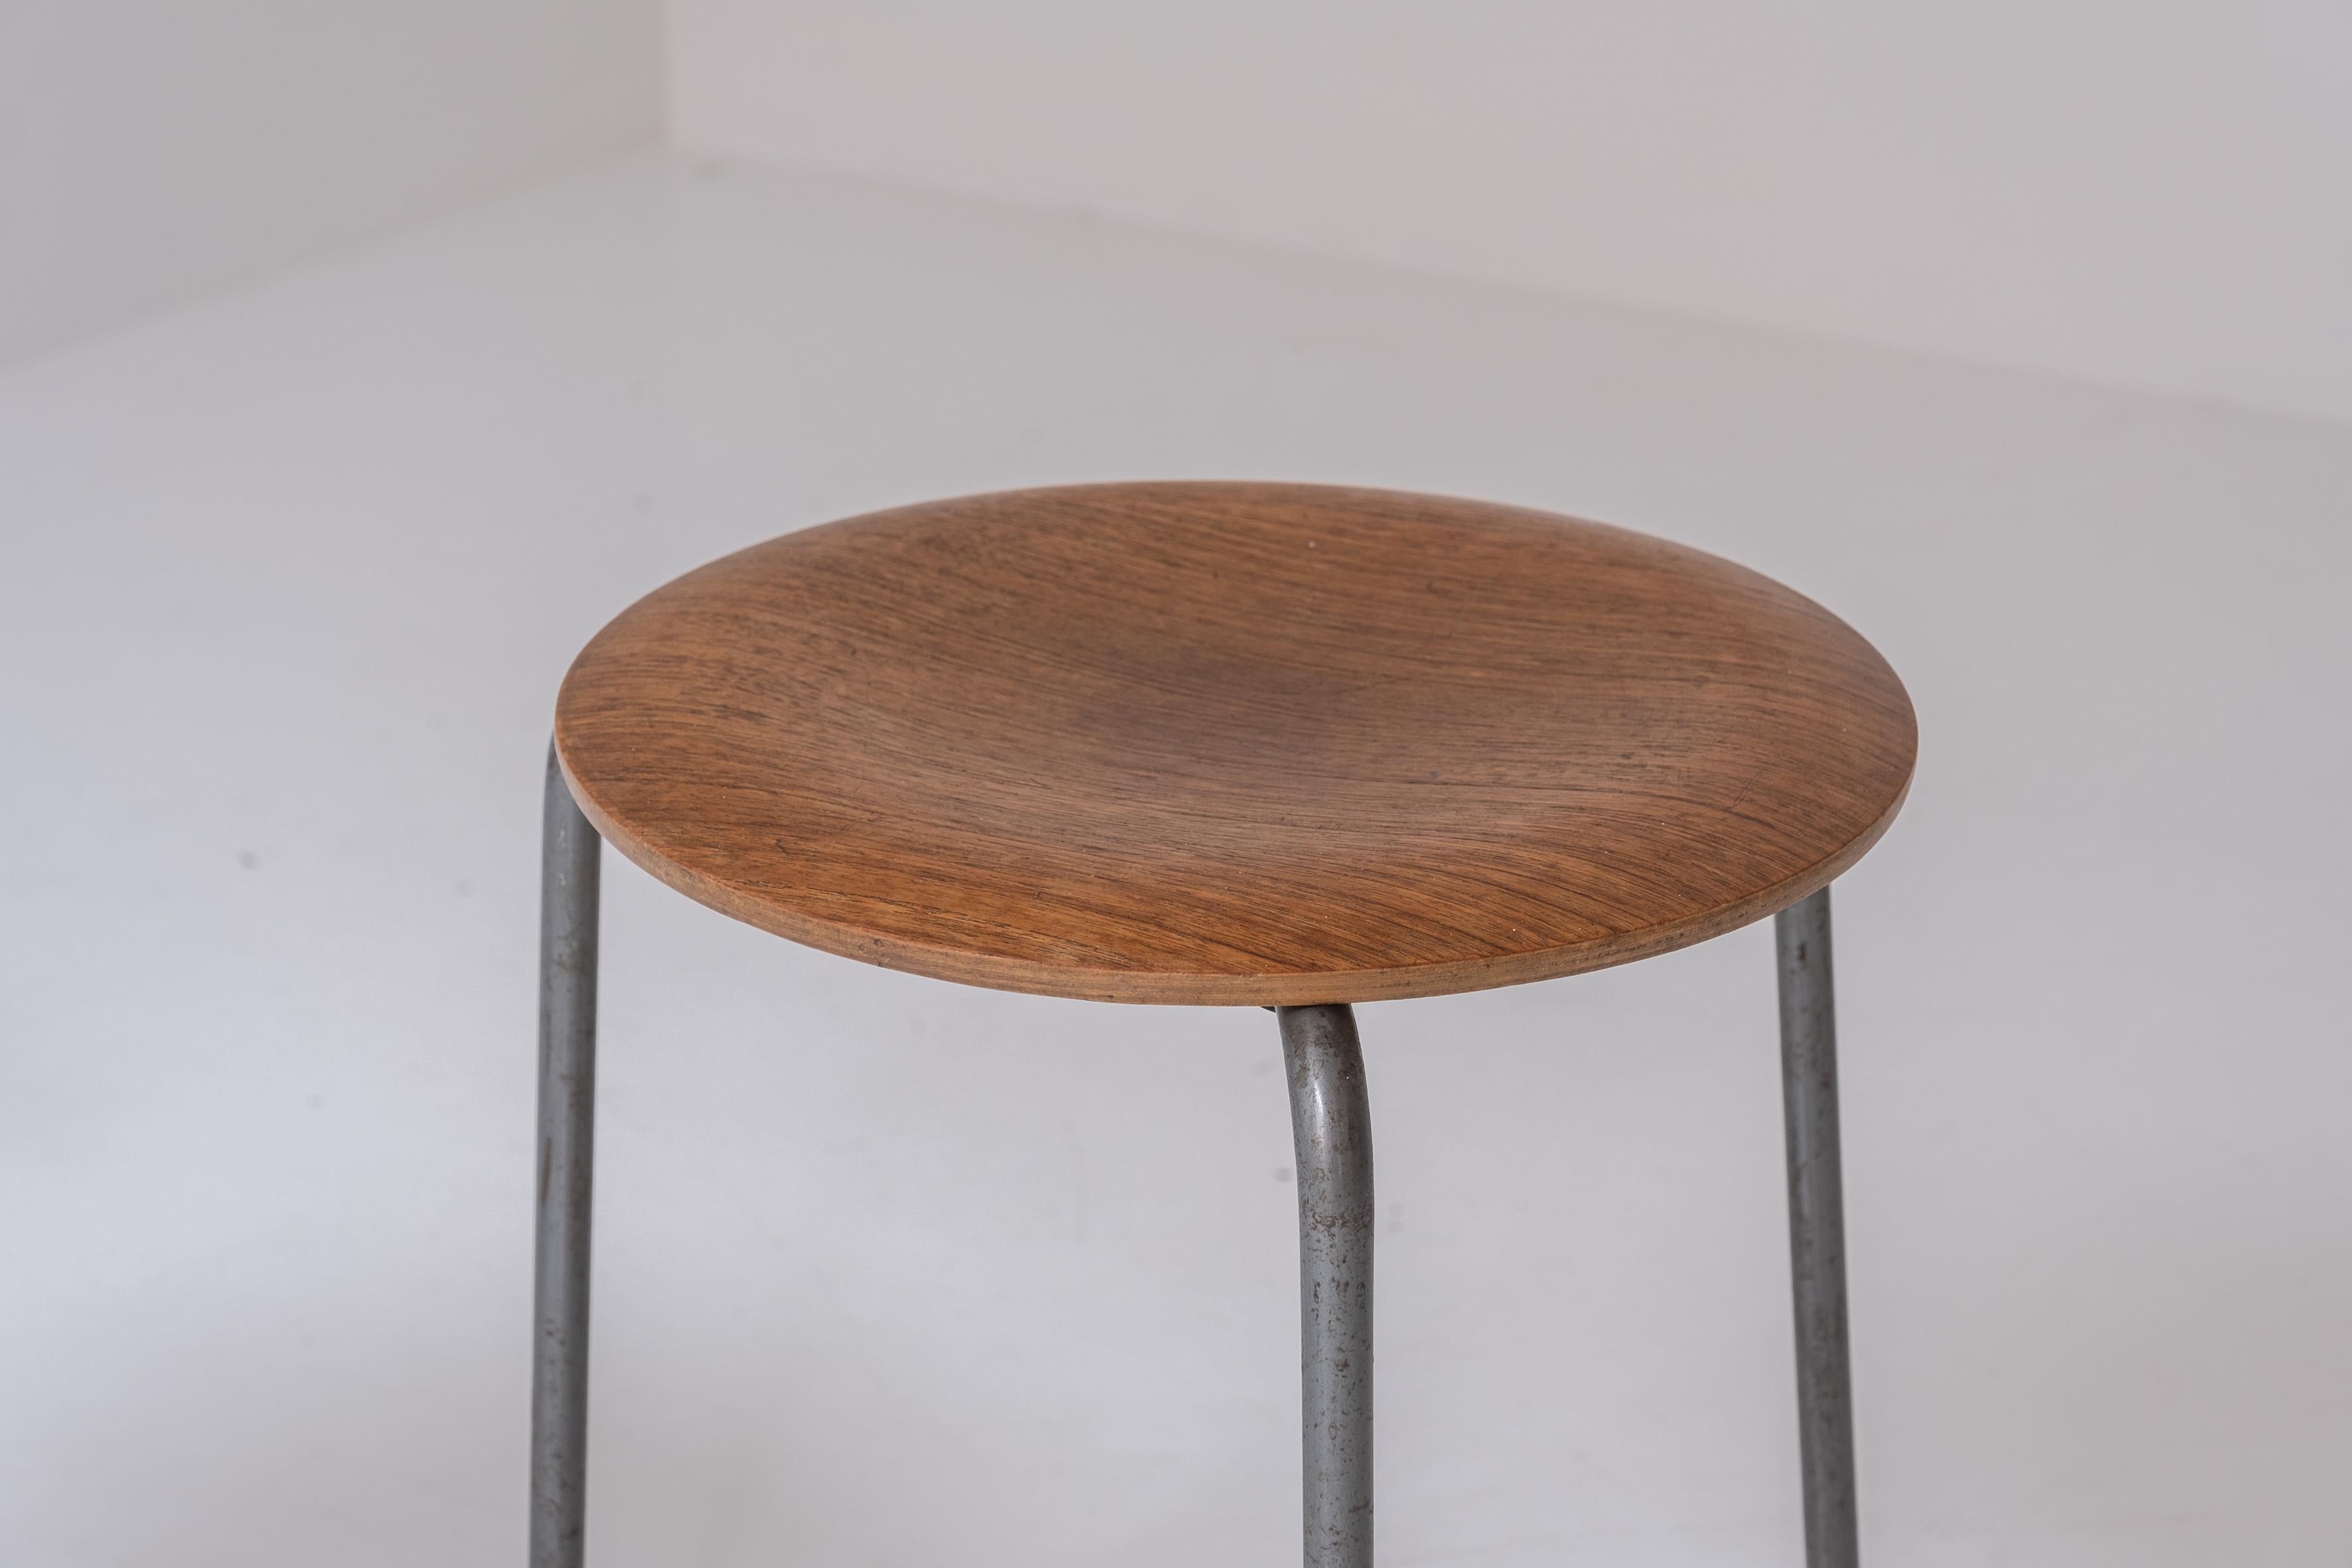 Mid-20th Century First Edition Pair ‘Dot’ Stools by Arne Jacobsen for Fritz Hansen, Denmark 1960s For Sale